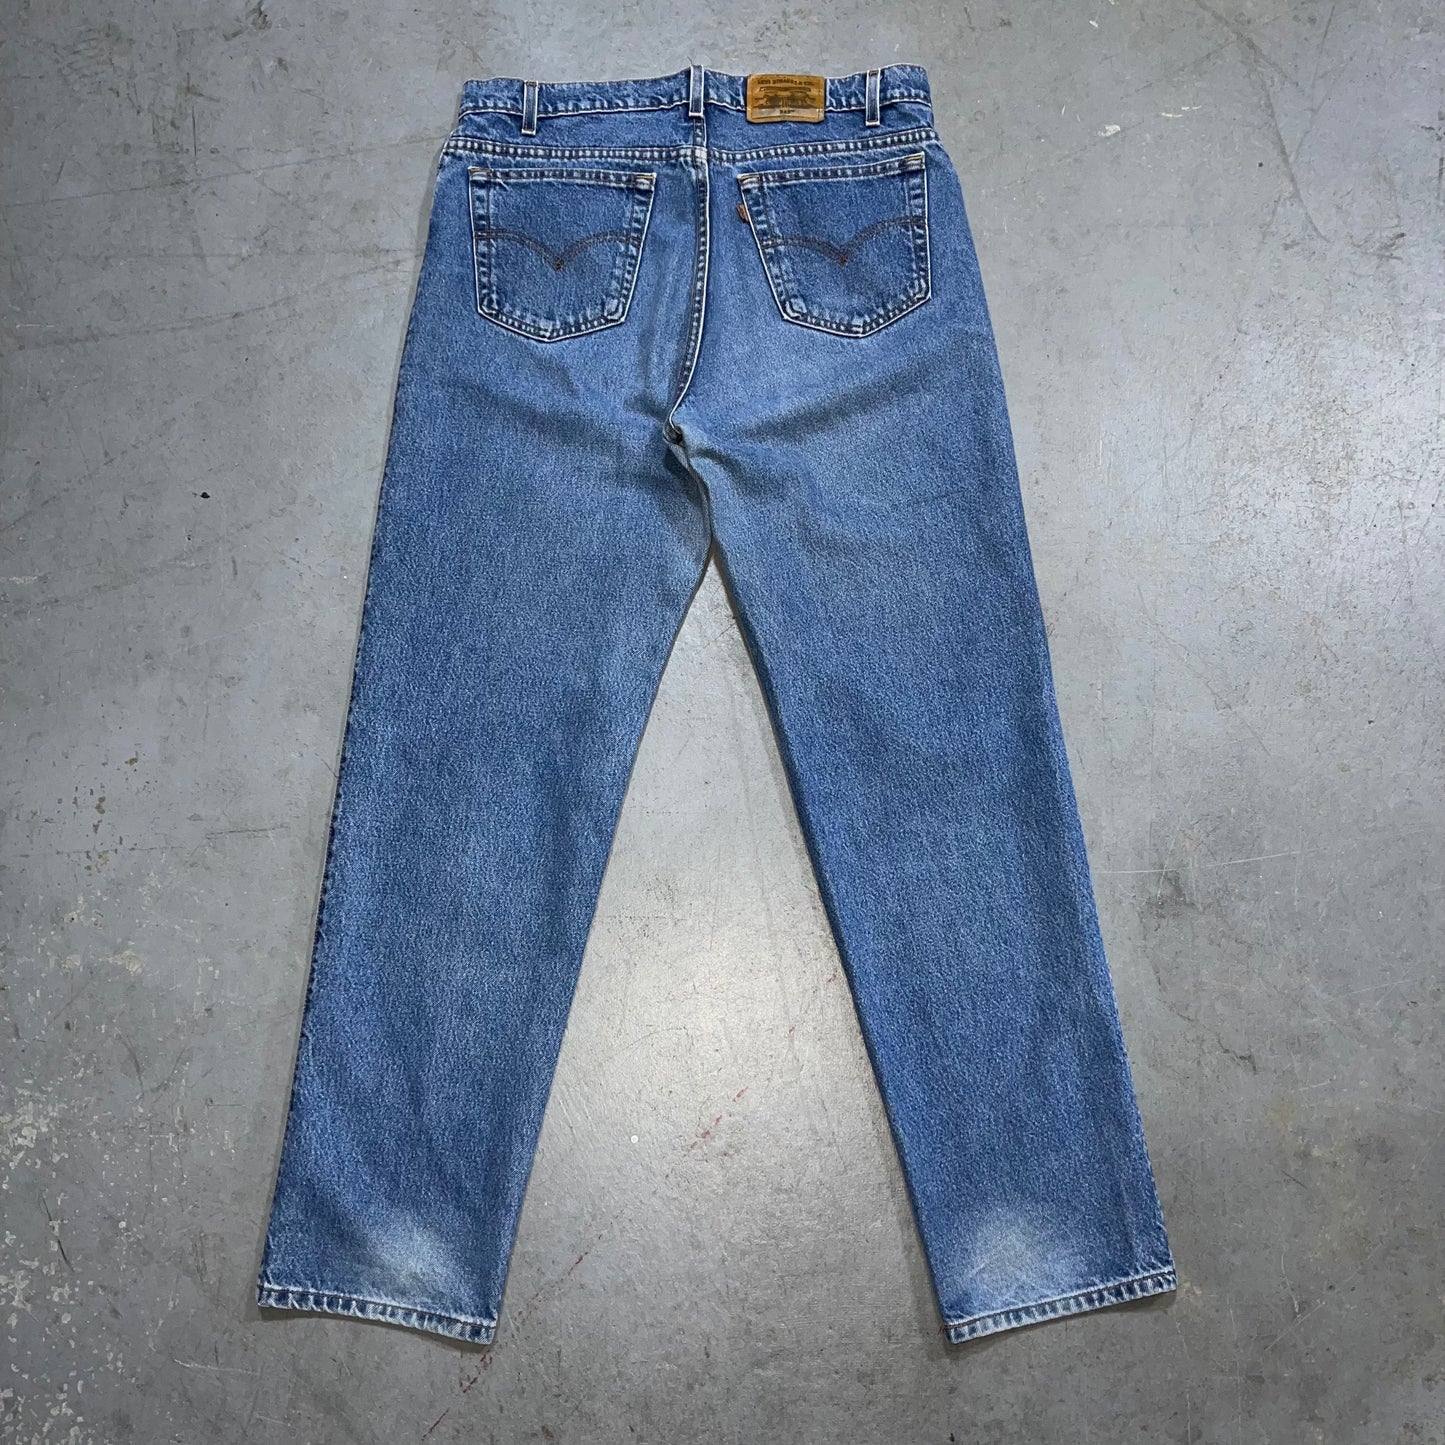 Vintage 90’s Levi’s 540 Relaxed Gold Tab Jeans. Size 36 x 32